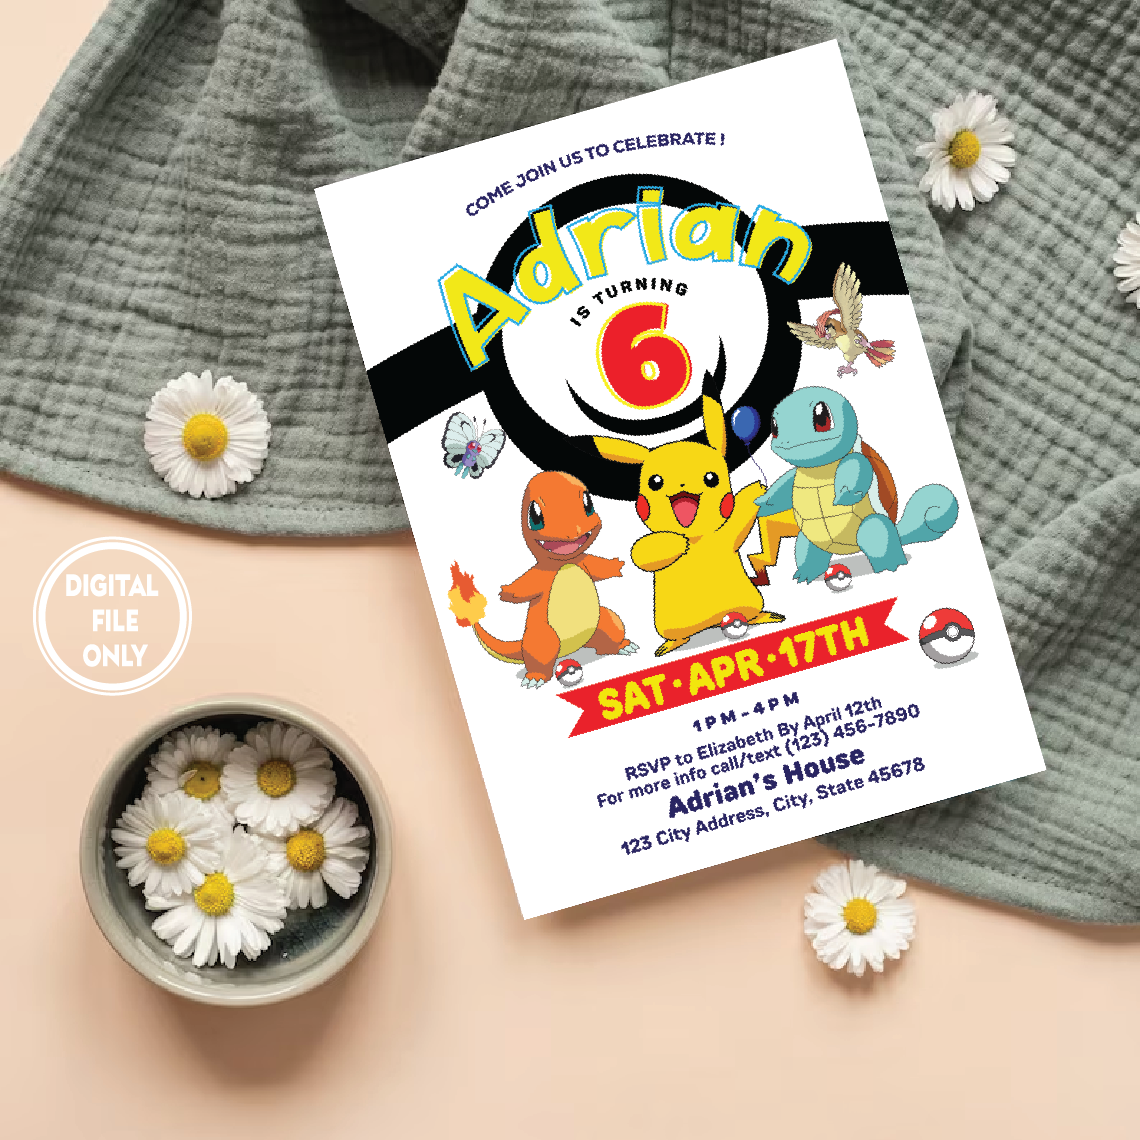 Personalized File Pikachu Birthday Invitation, Pokemon Invitation, Pokemon Birthday Invitation, Pokemon Invitation, Pikachu Invitation Invite PNG File Only